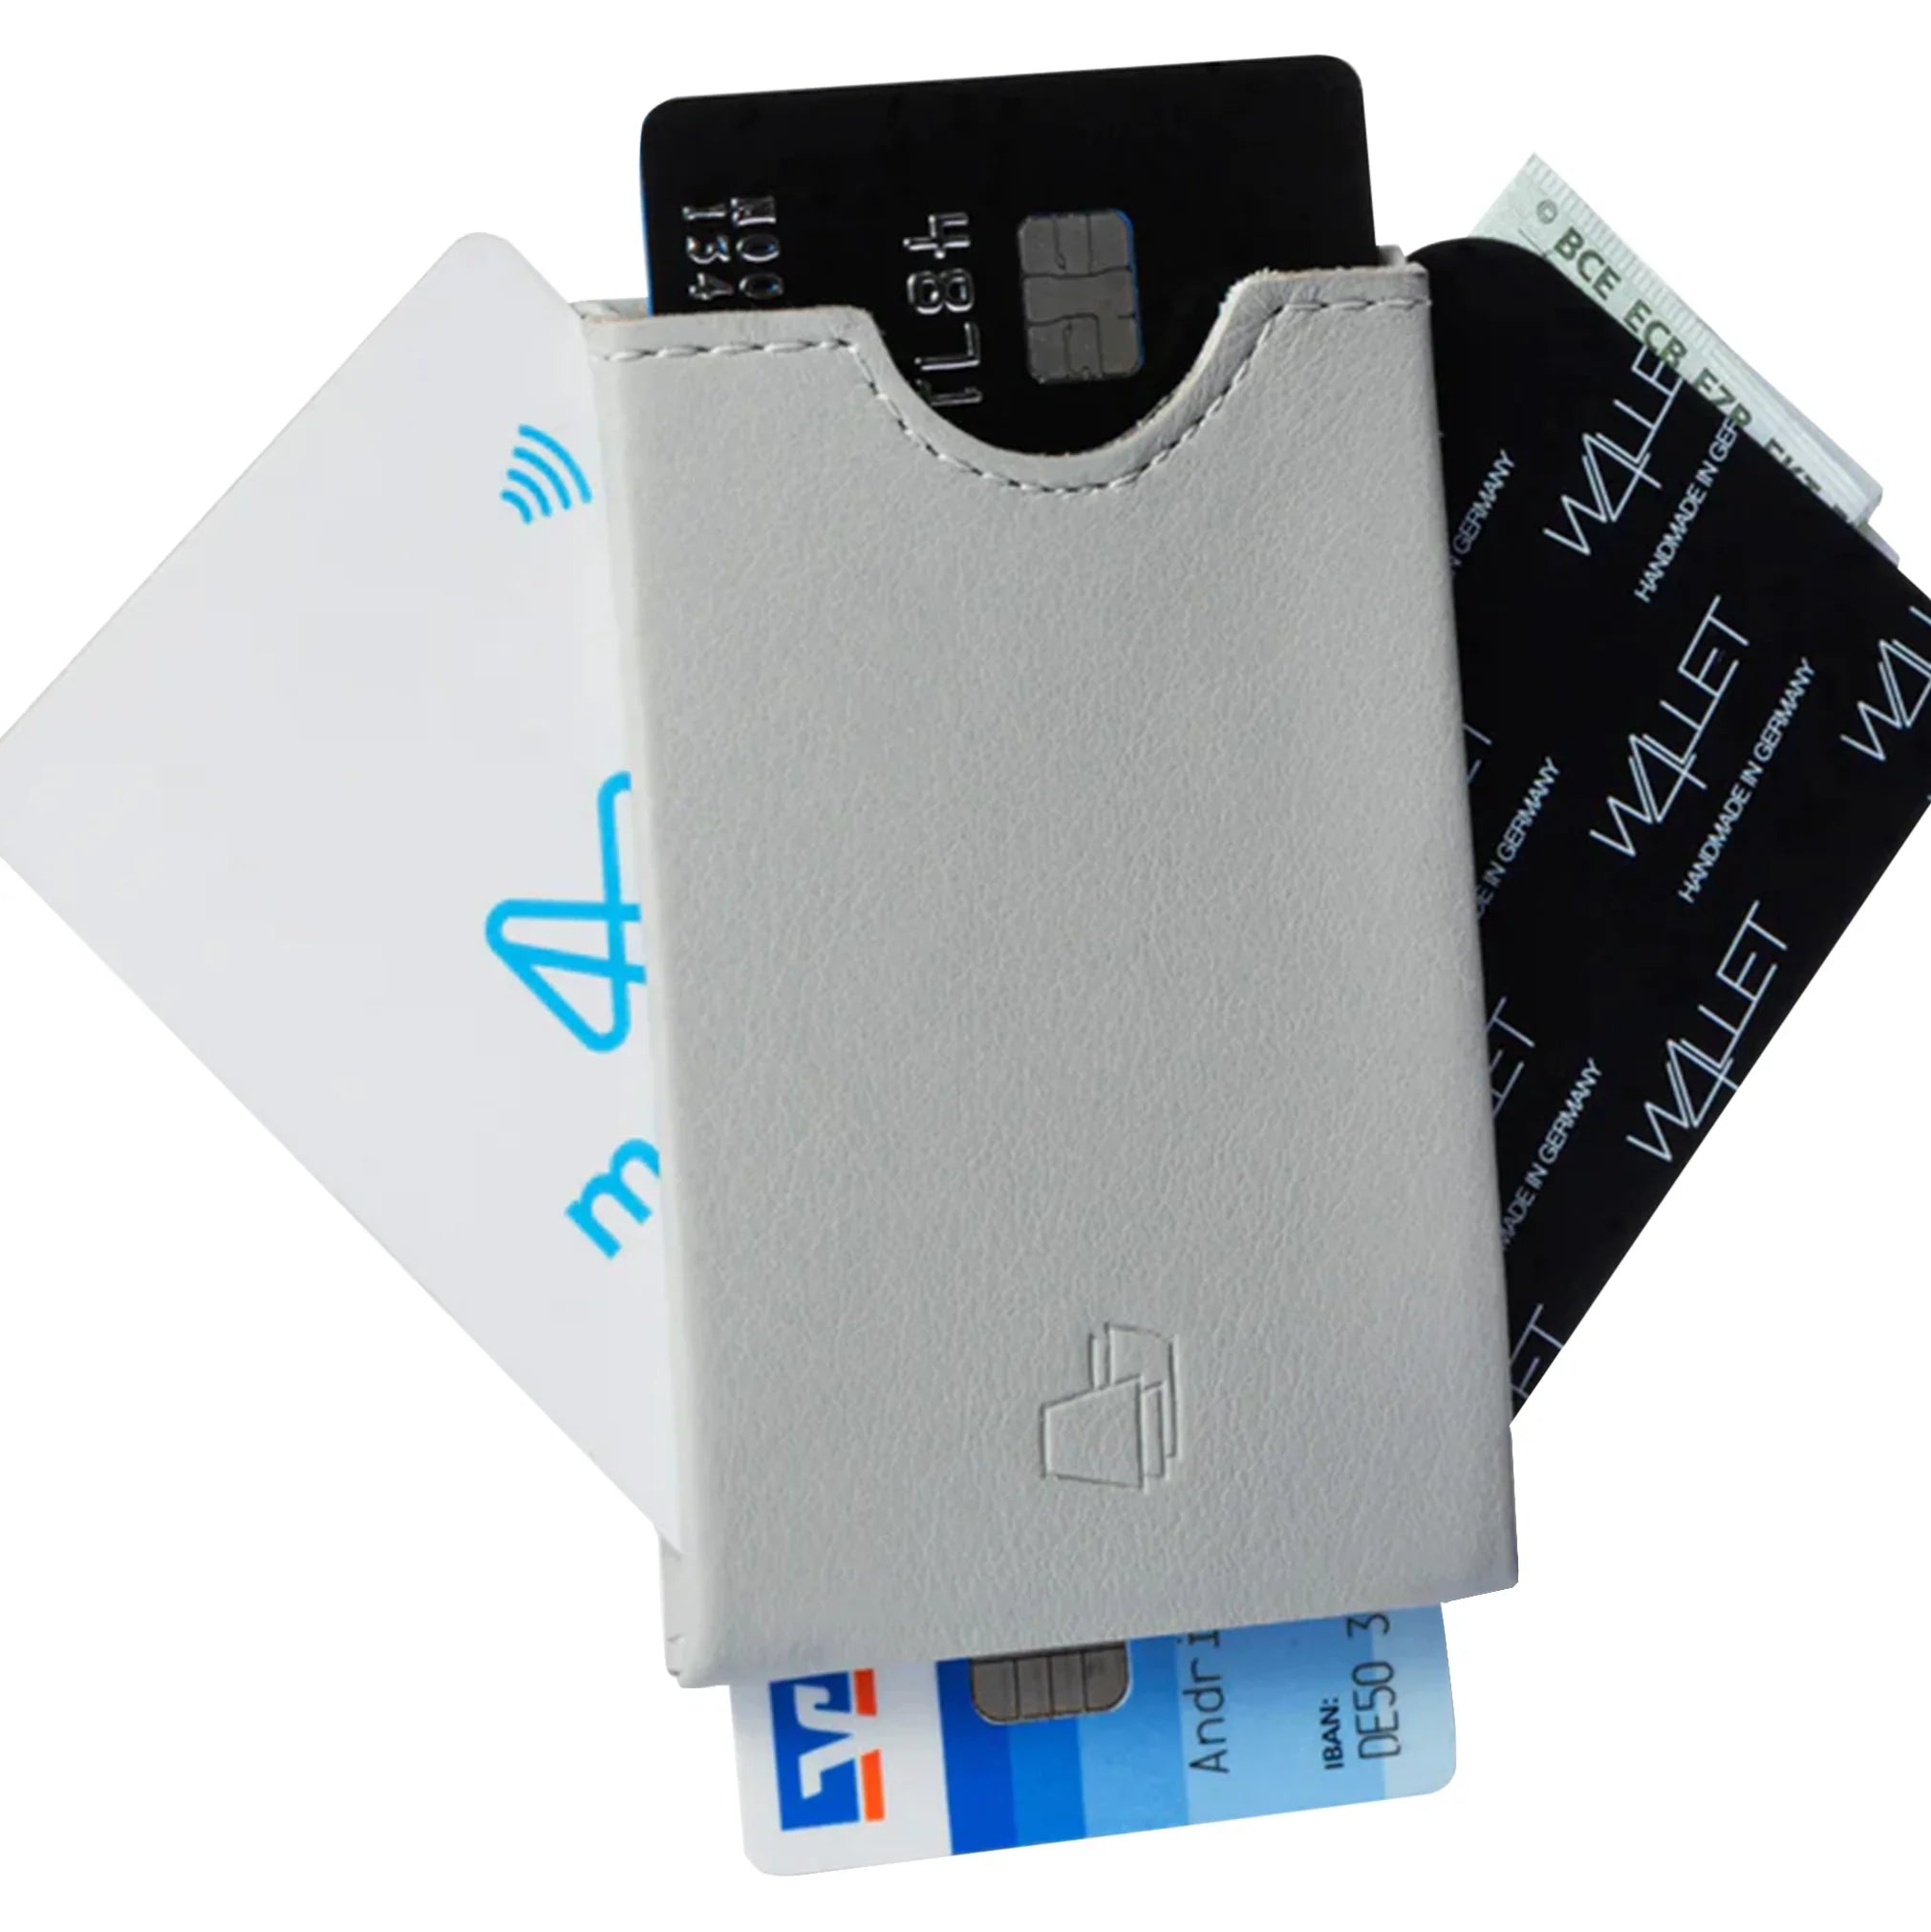 W4llet smooth leather credit card Eui 9 cm - Navy